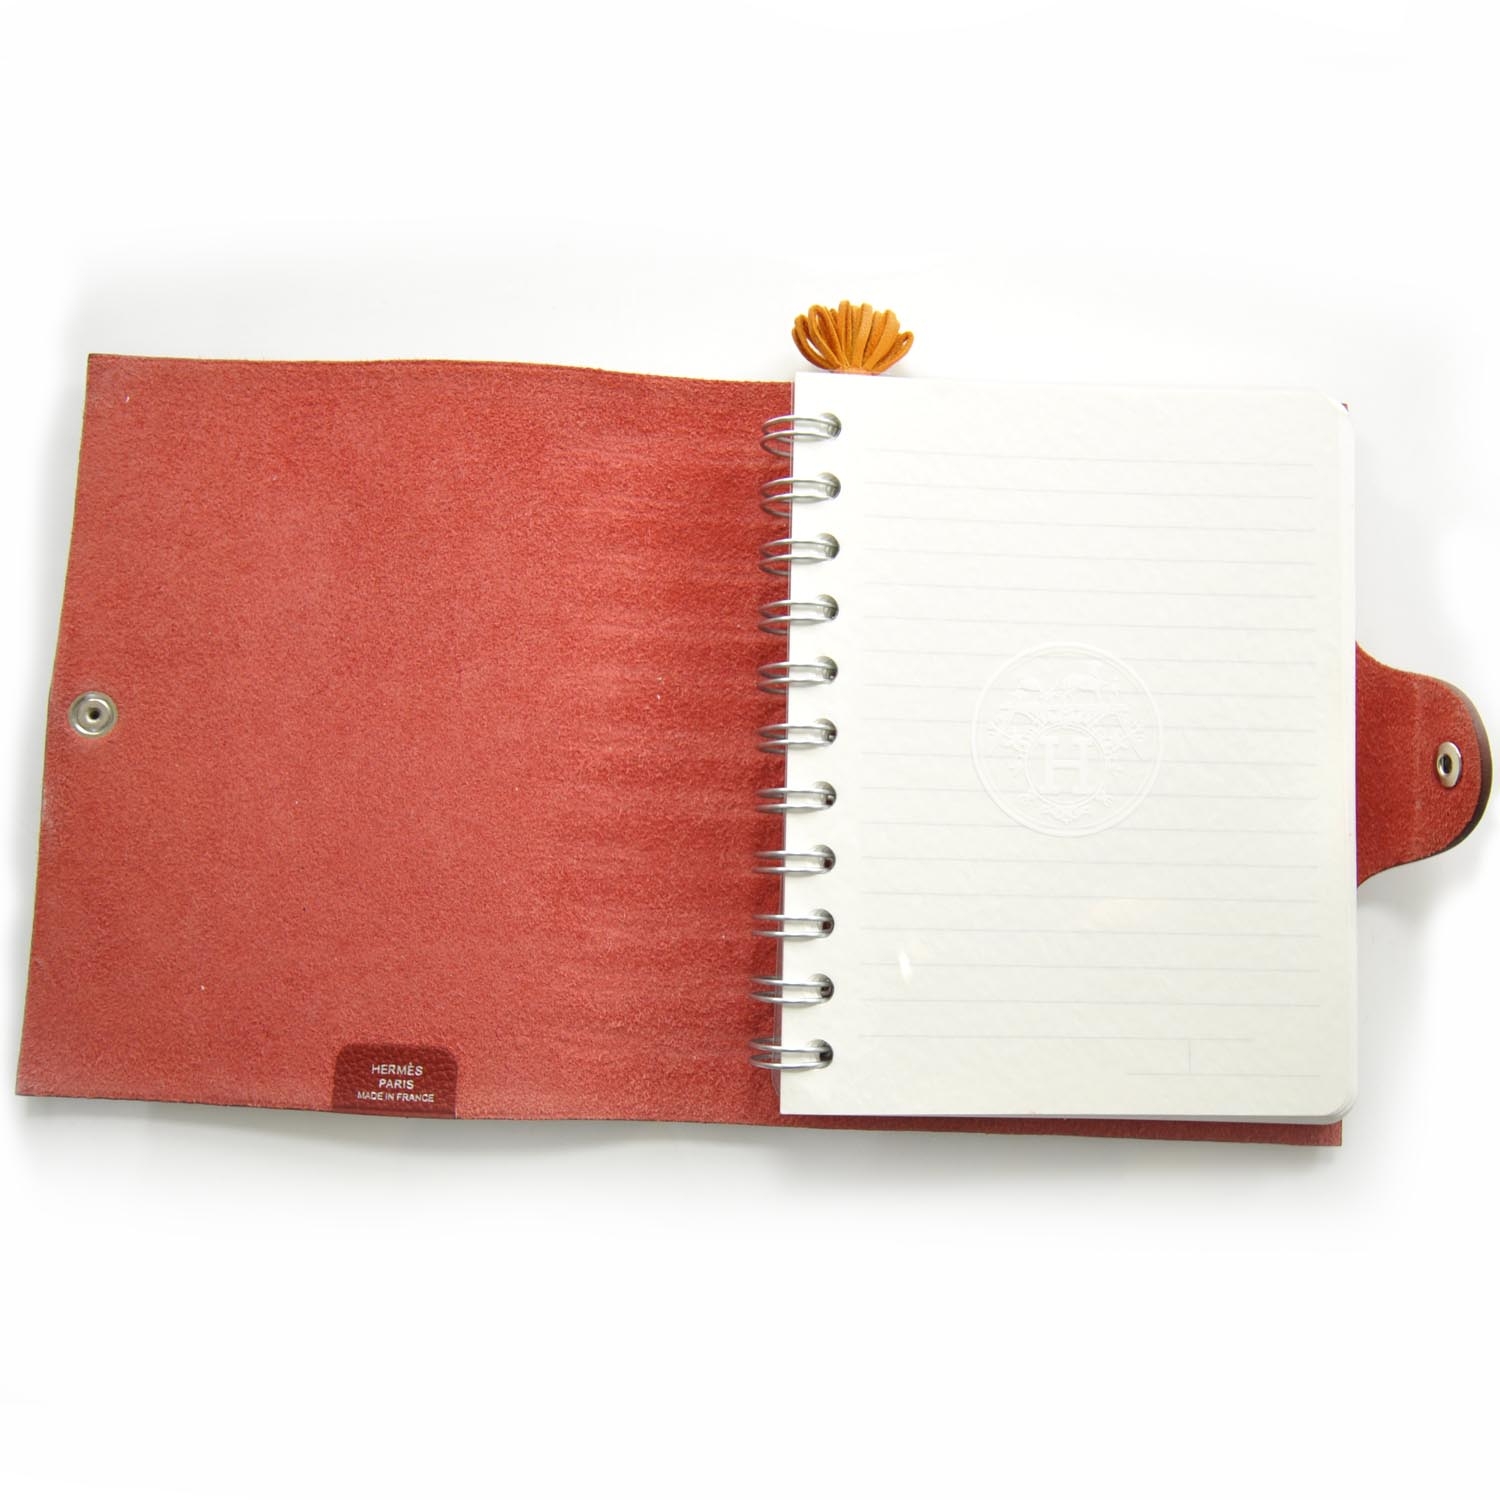 HERMES Togo Ulysse PM Notebook Cover w Refill and Carmencita Page